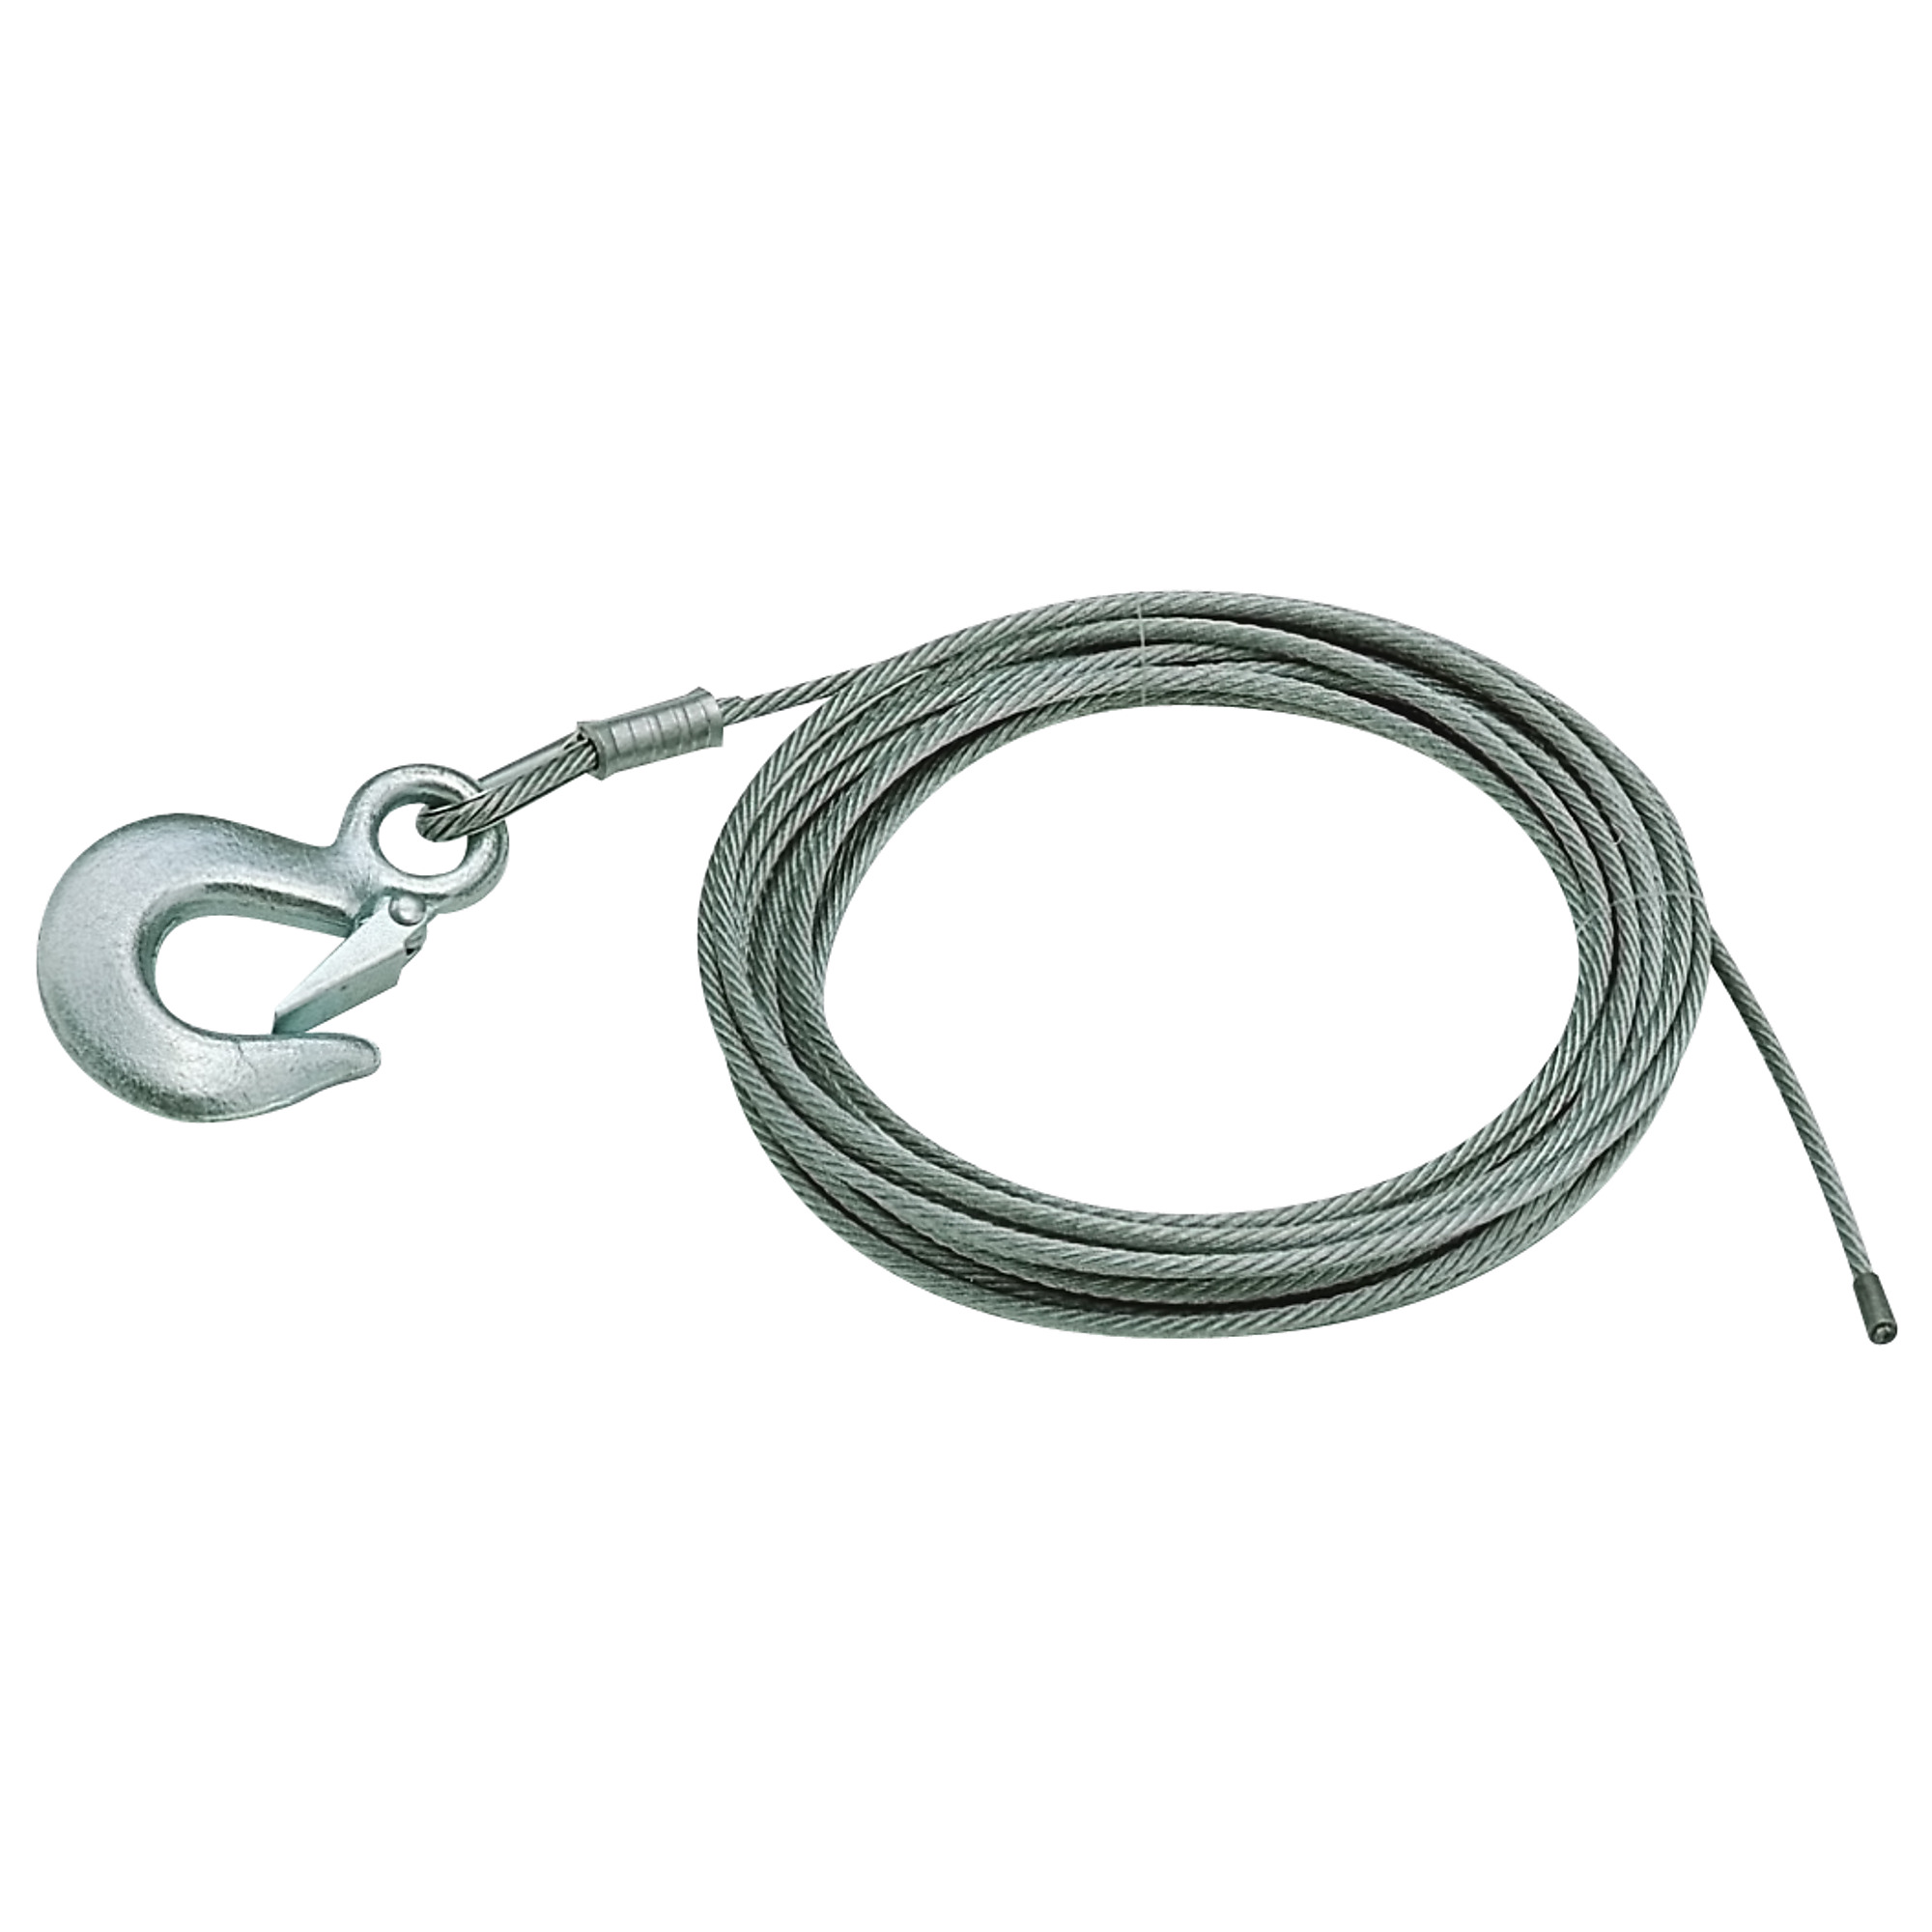 American Power Pull, 25ft. Winch Cable, Model AGP101W